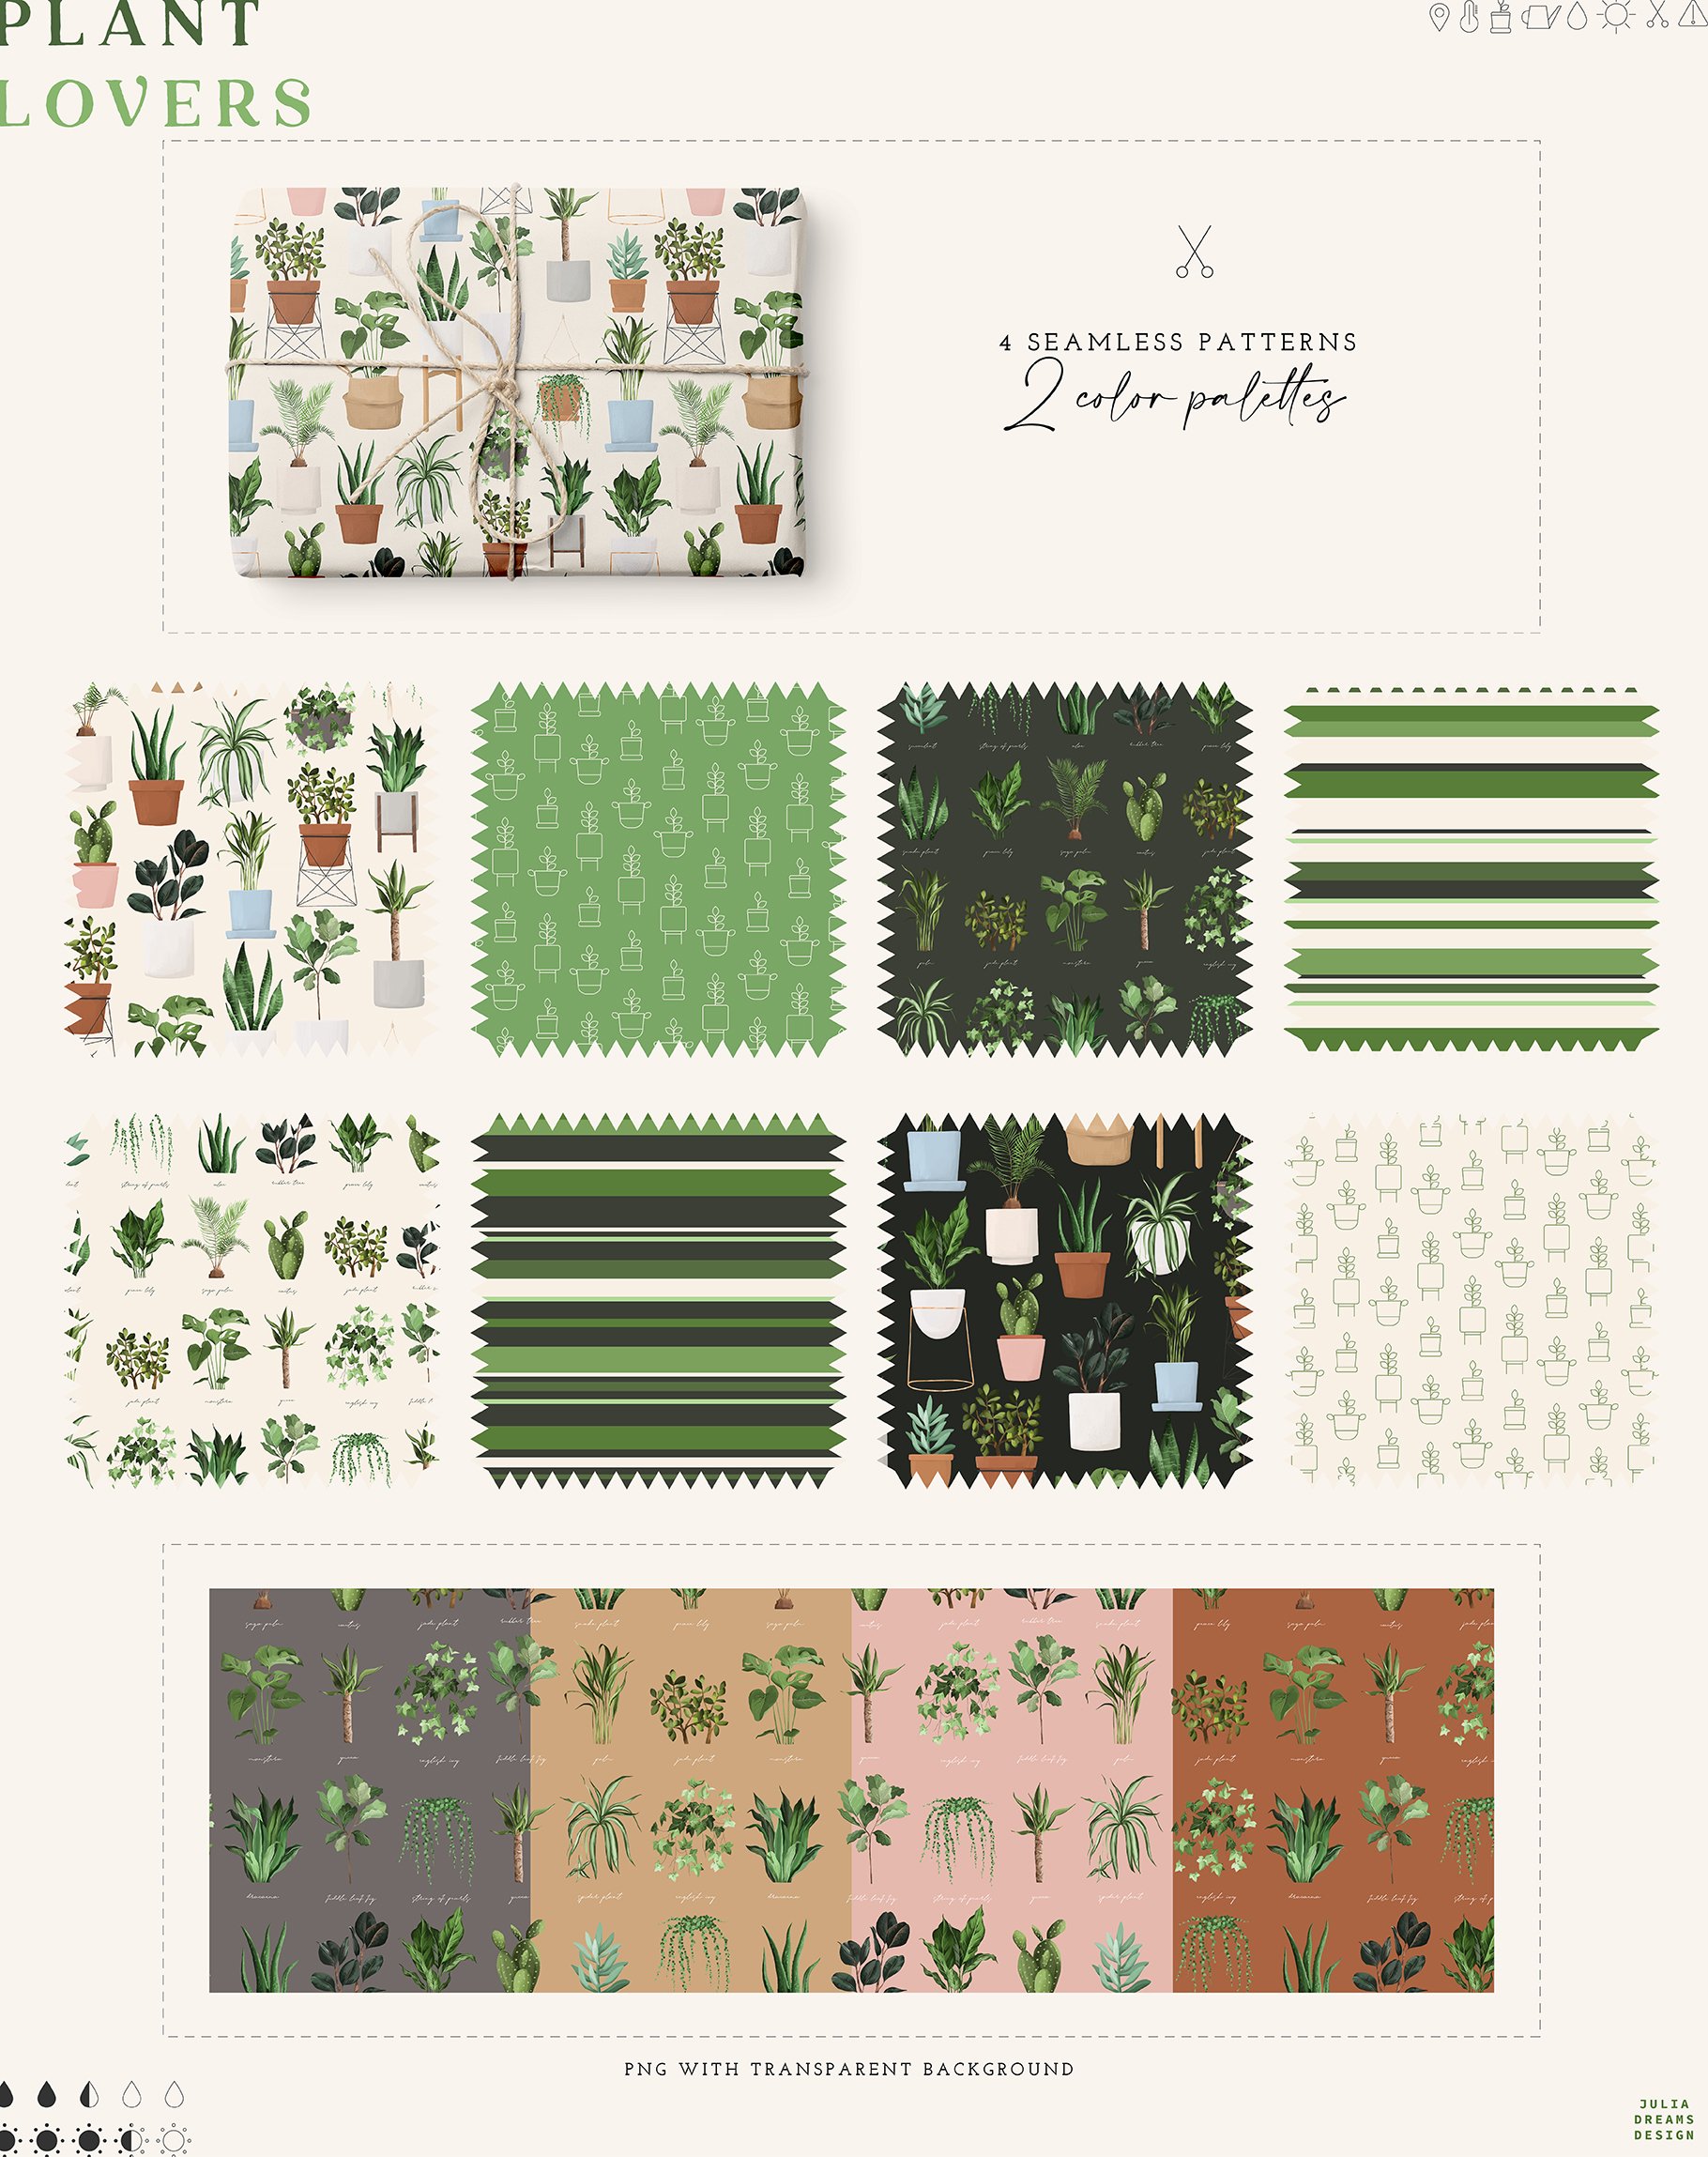 Various of plants patterns.